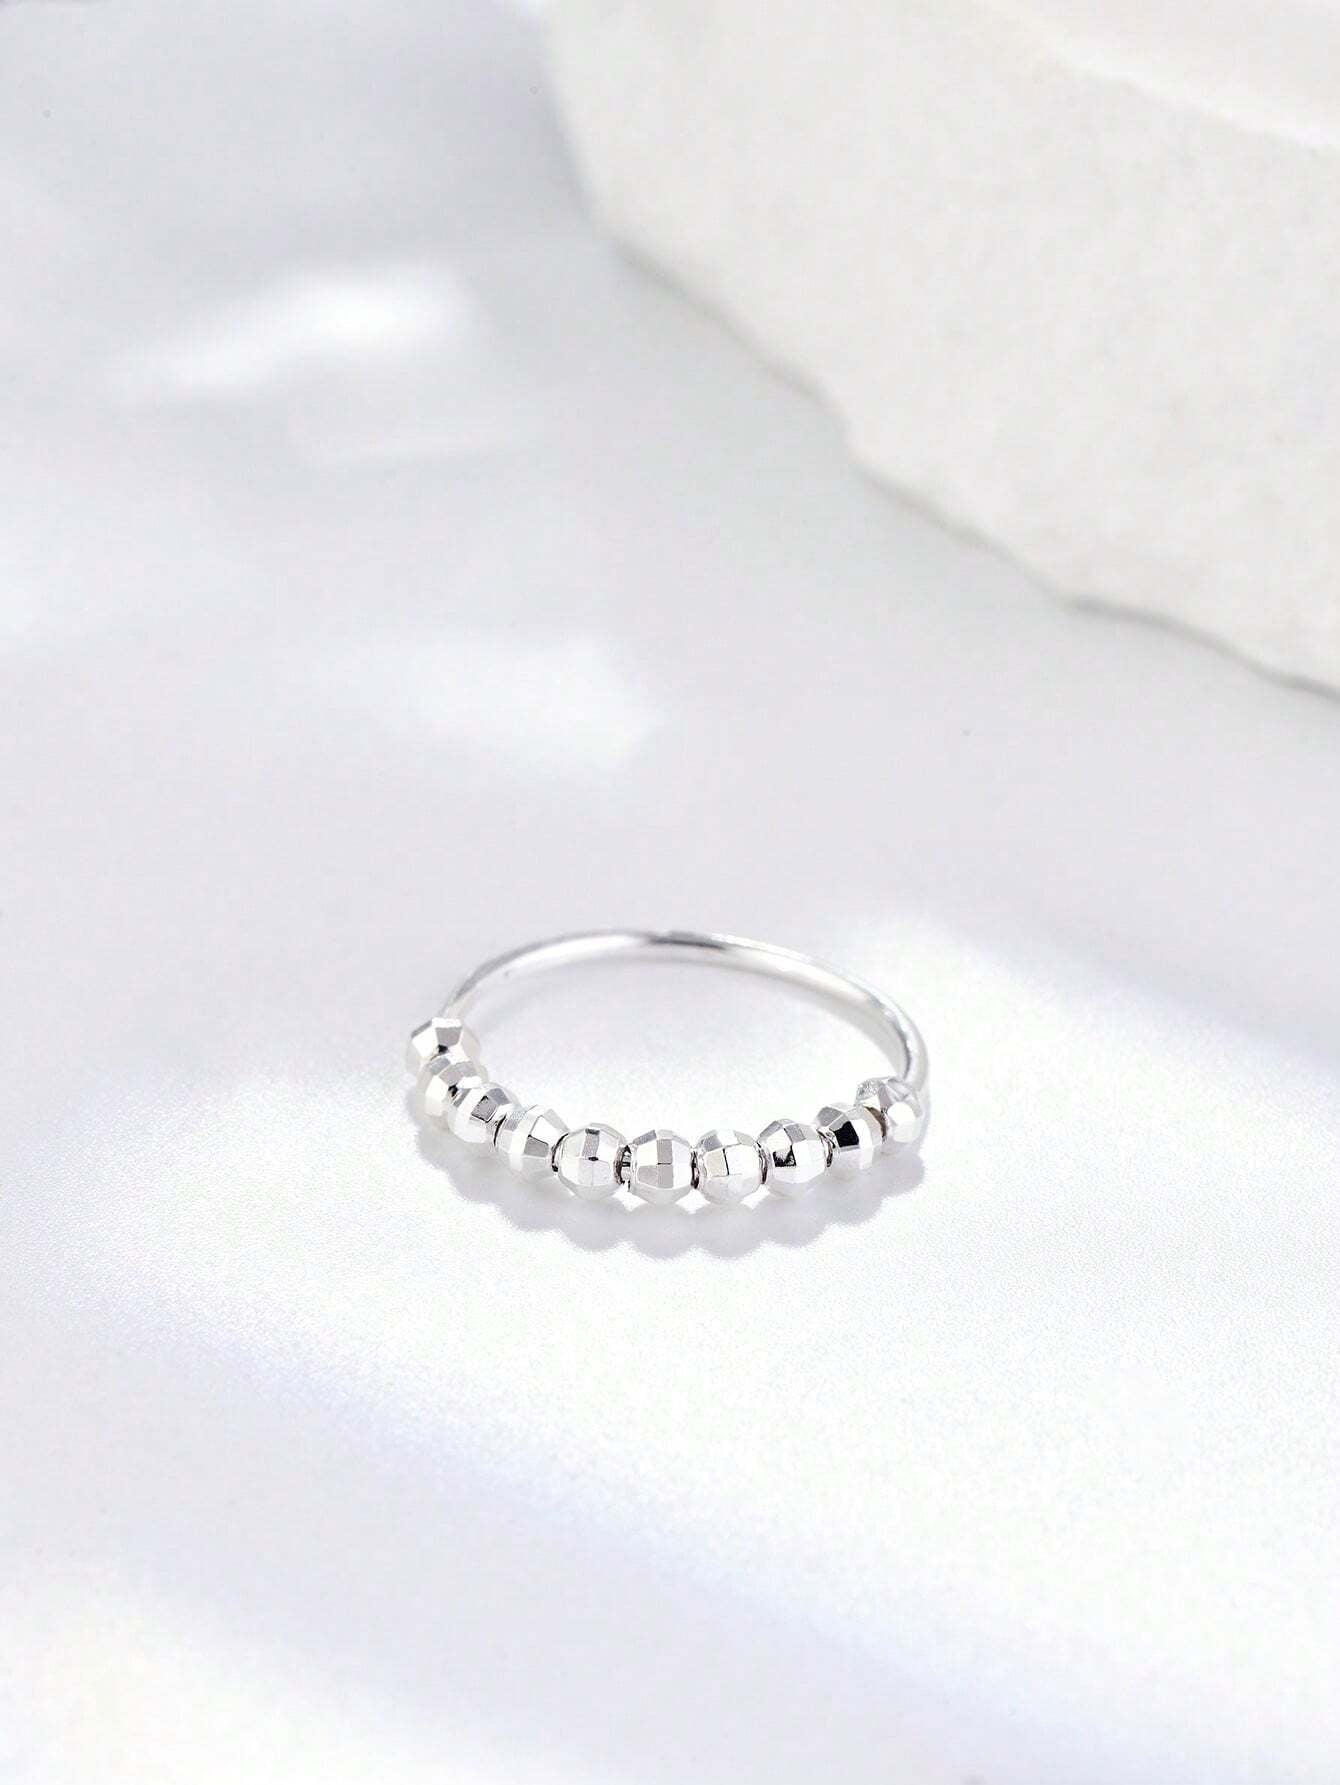 1pc Unique Personality S925 Sterling Silver Ring with Geometric Design and Rotating Ball - Suitable for Women's Daily Wear.